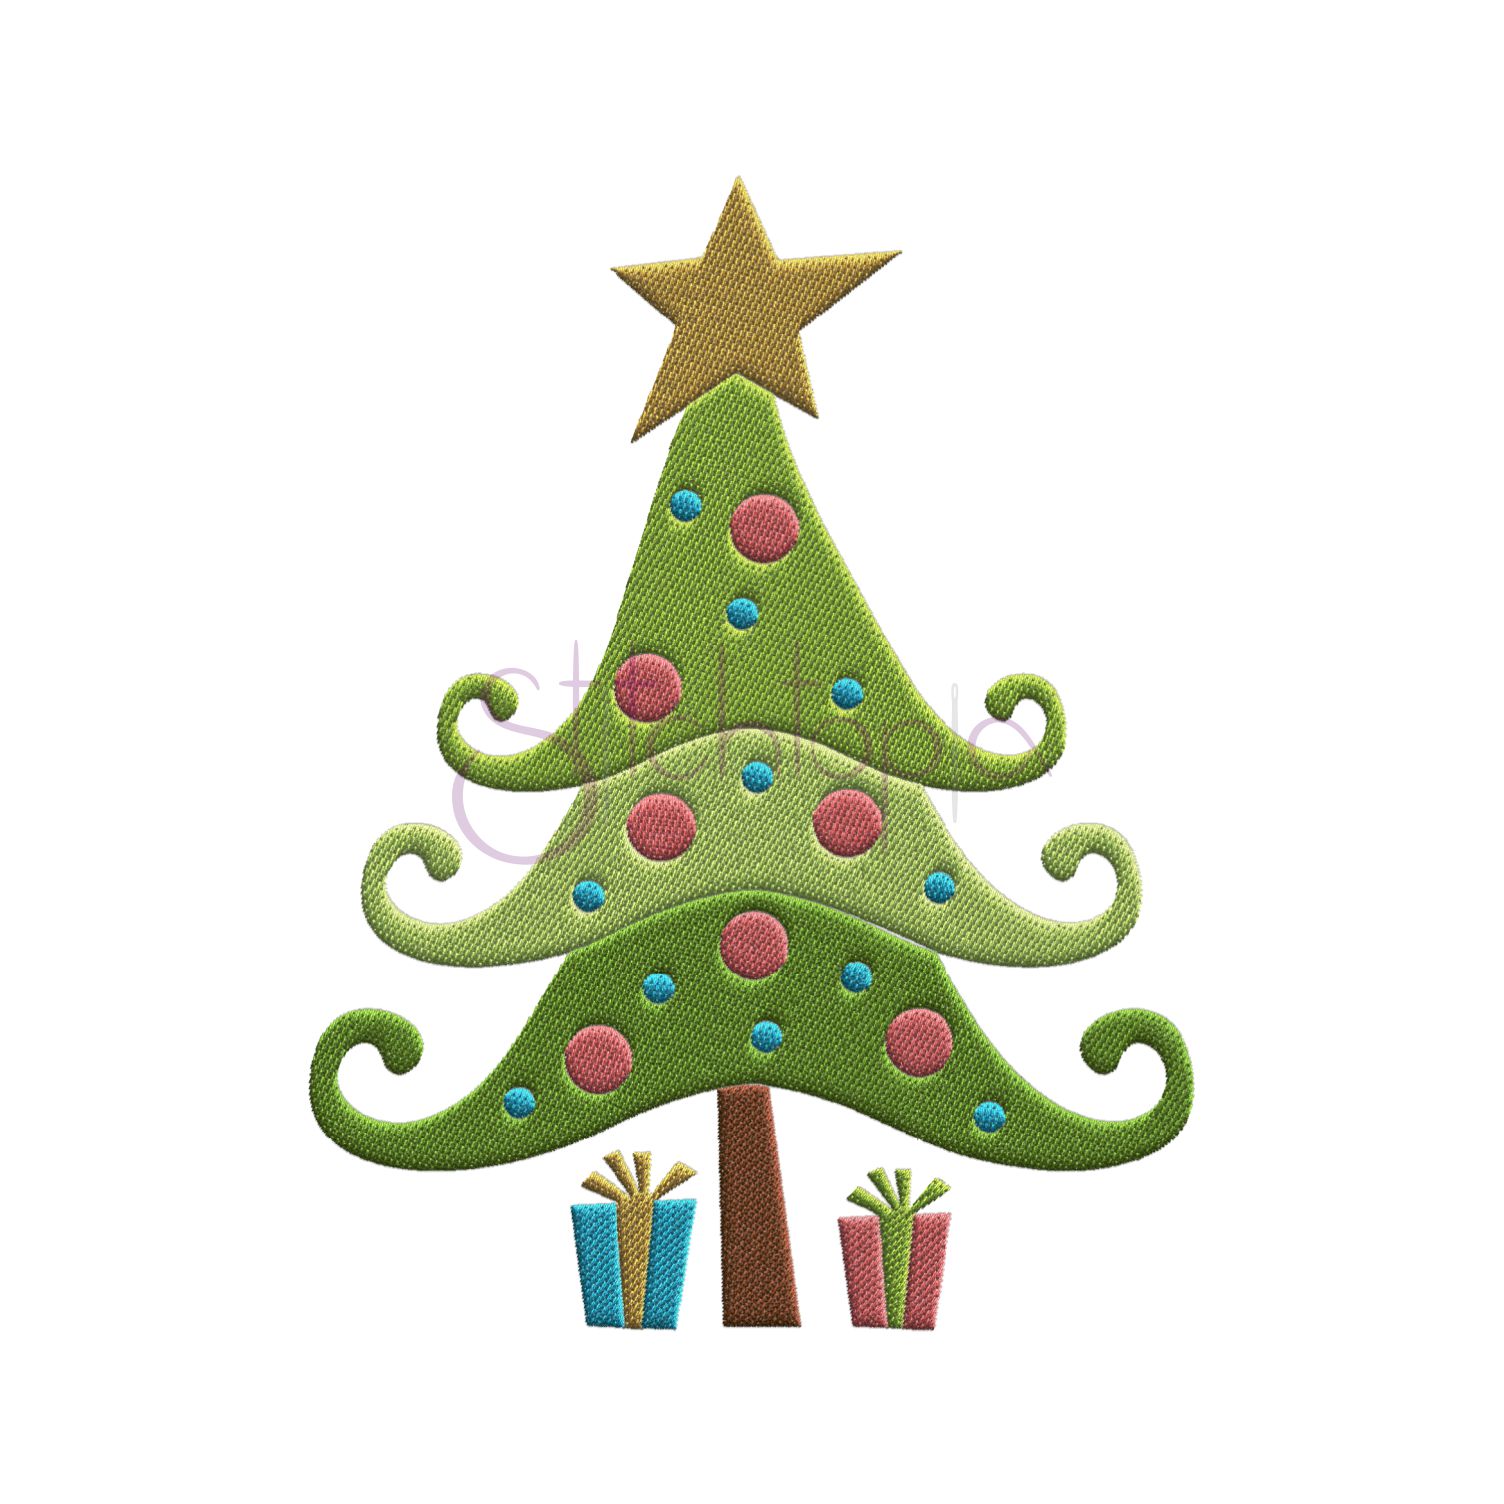 Christmas Tree Embroidery Design - Whimsical | Stitchtopia